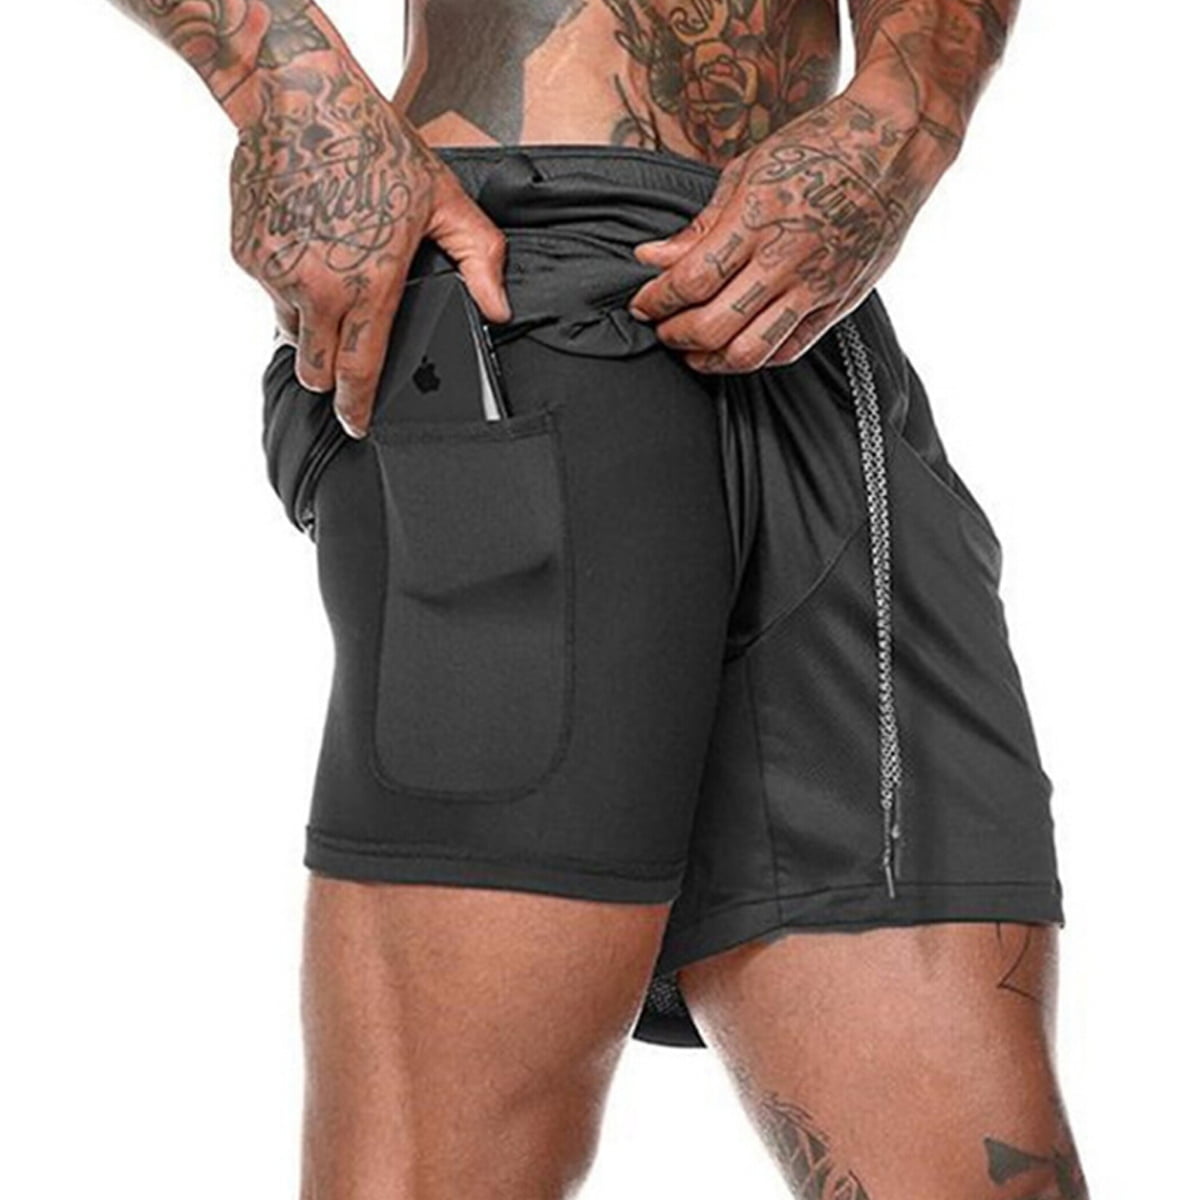 BTAPARK 2 in 1 Workout Running Shorts for Men Quick Dry Shorts Fitness Athletic Training Shorts